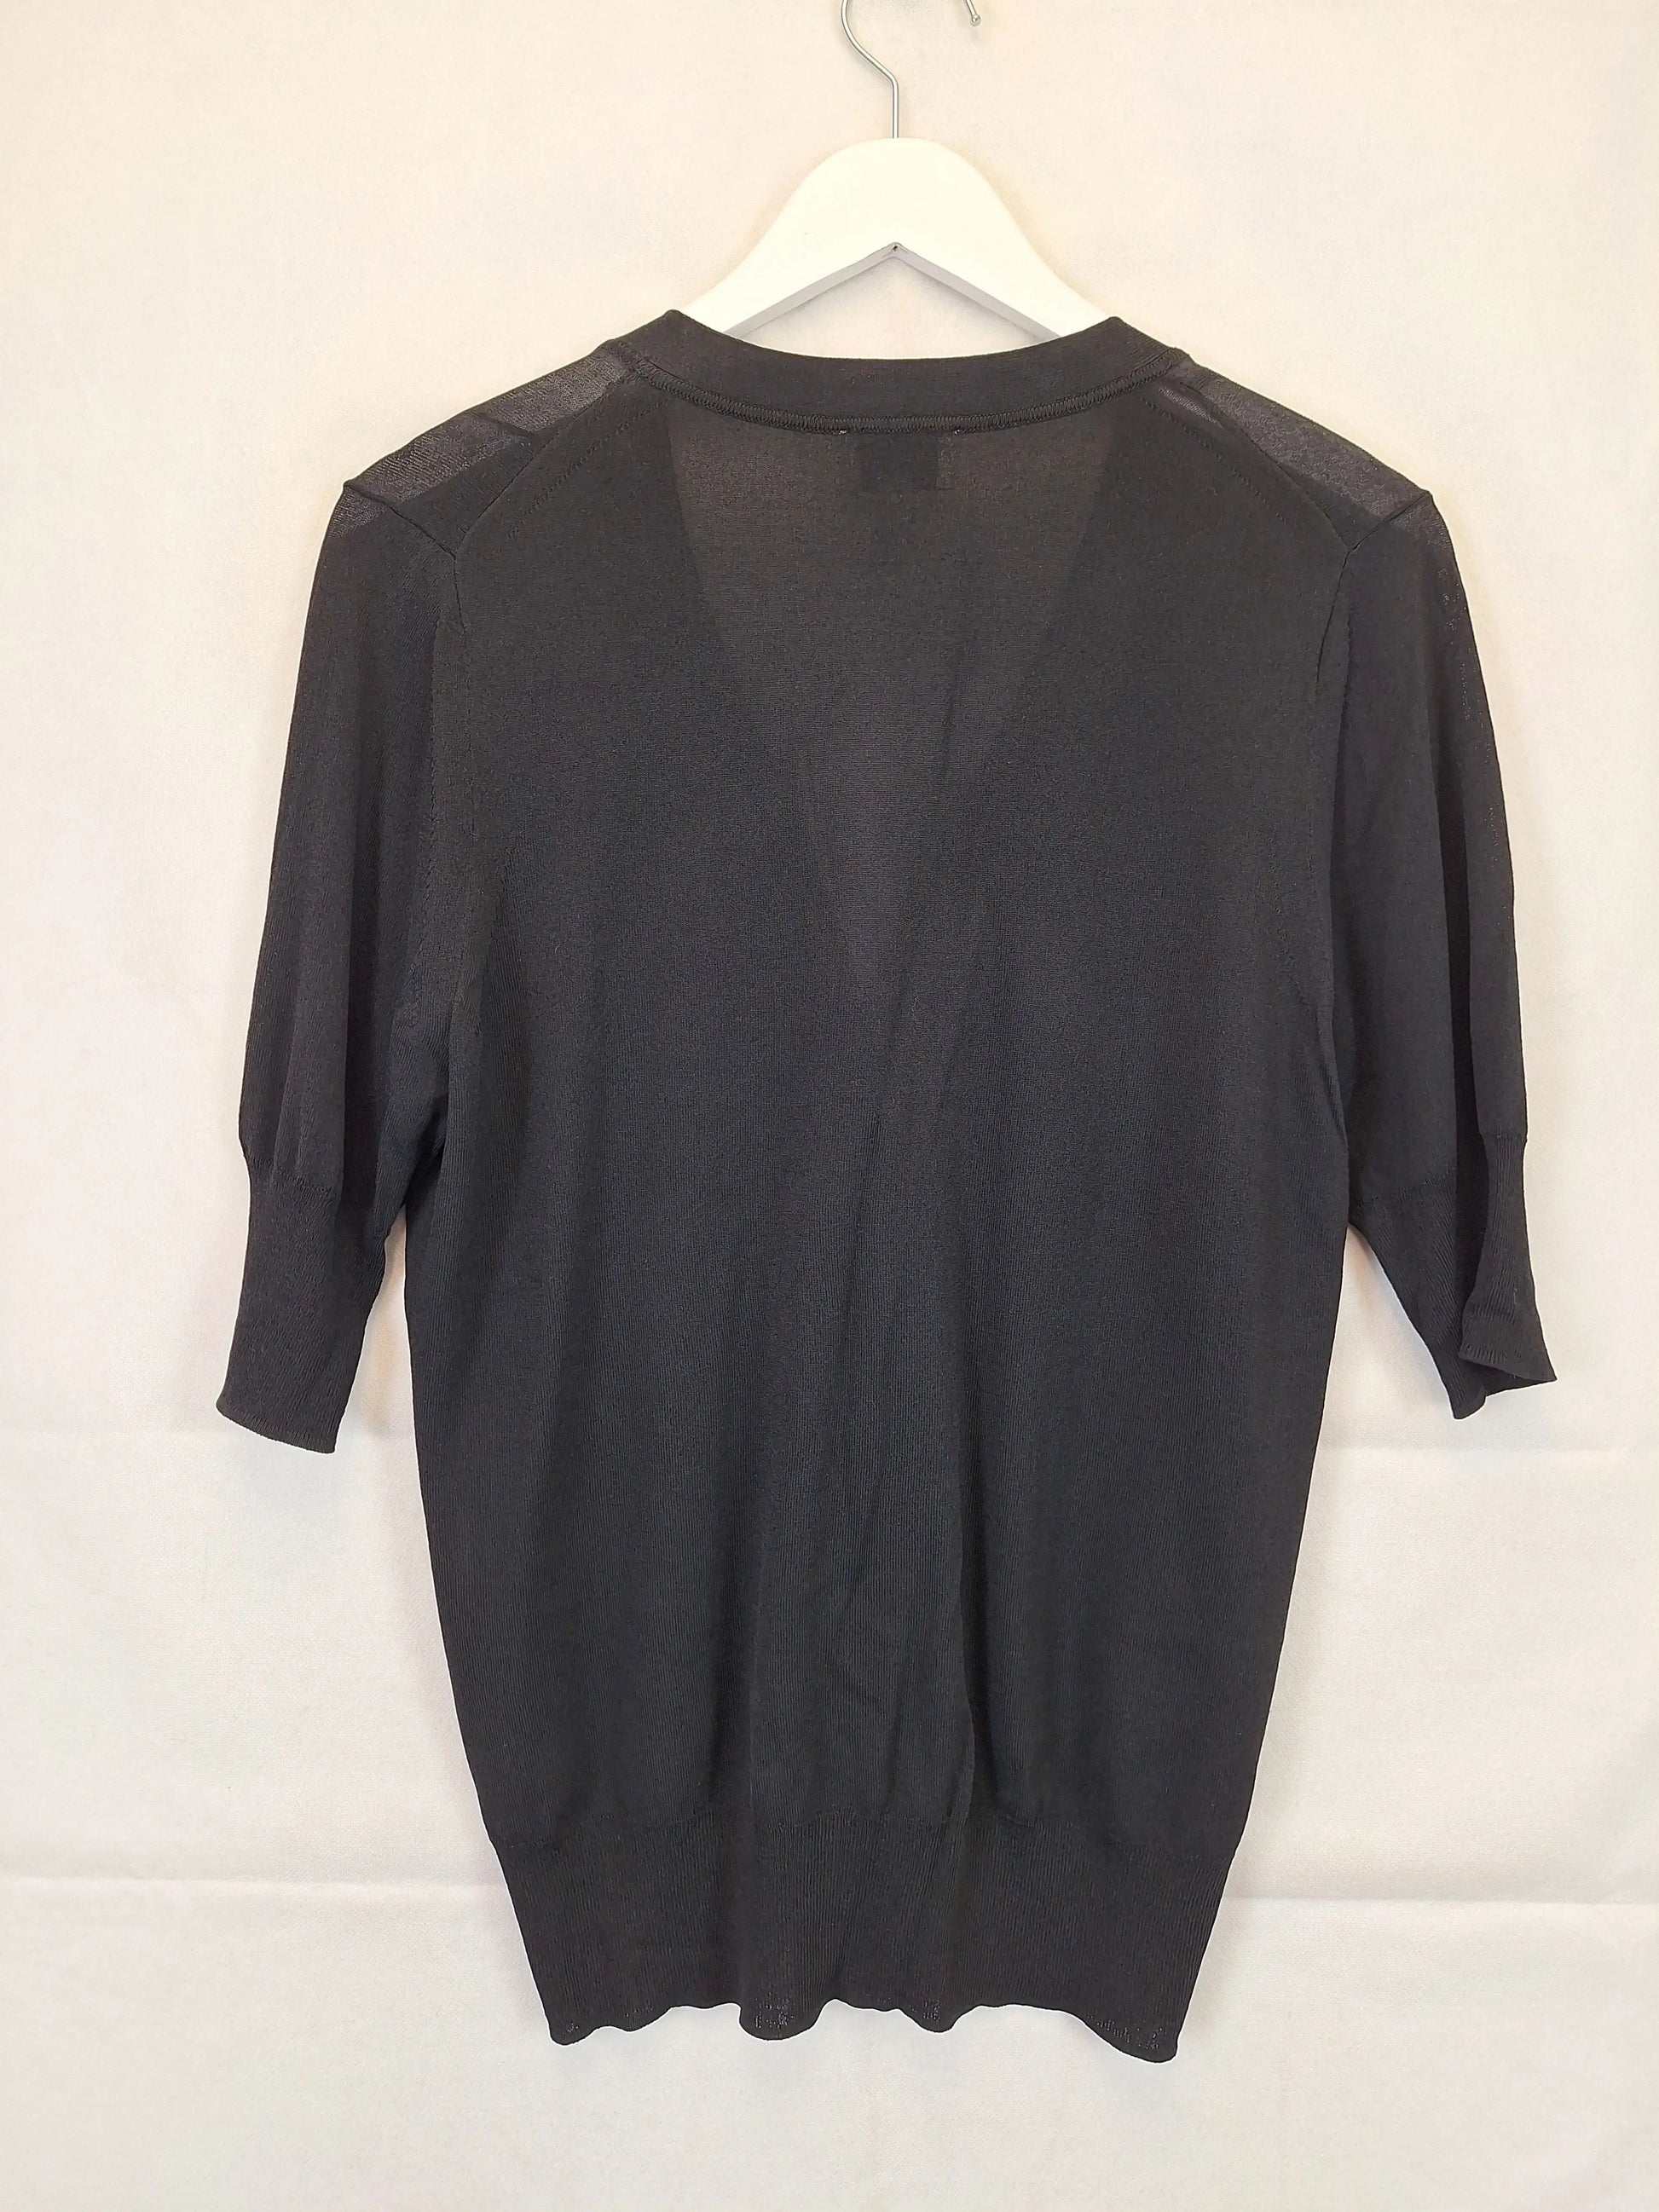 Witchery Lightweight Short Sleeve Cardigan Size M by SwapUp-Online Second Hand Store-Online Thrift Store